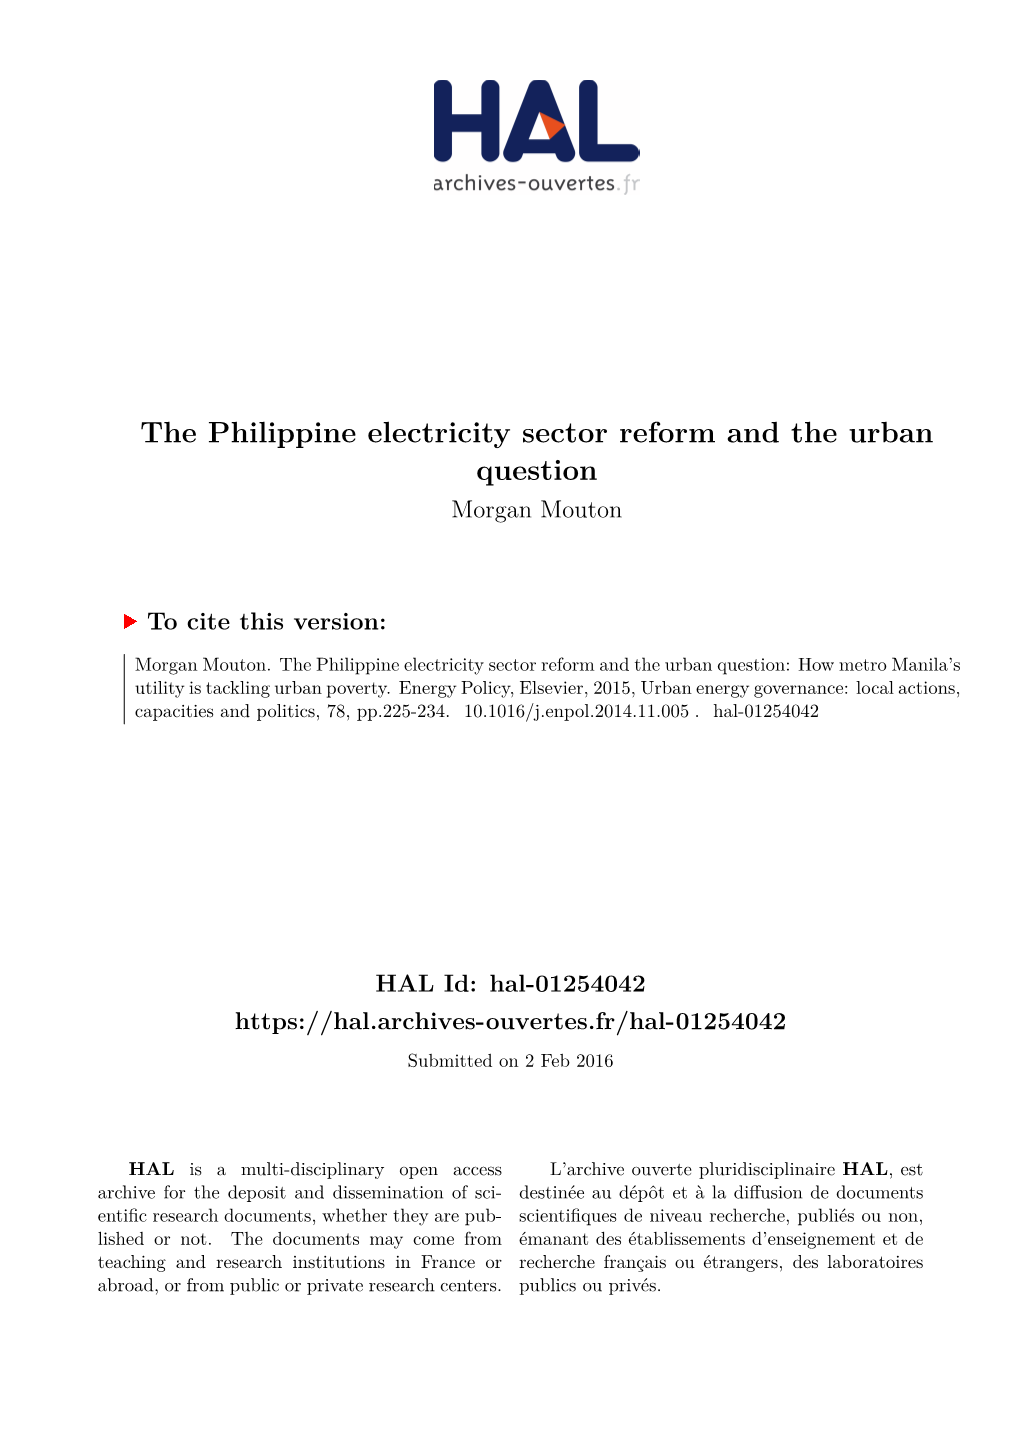 The Philippine Electricity Sector Reform and the Urban Question Morgan Mouton